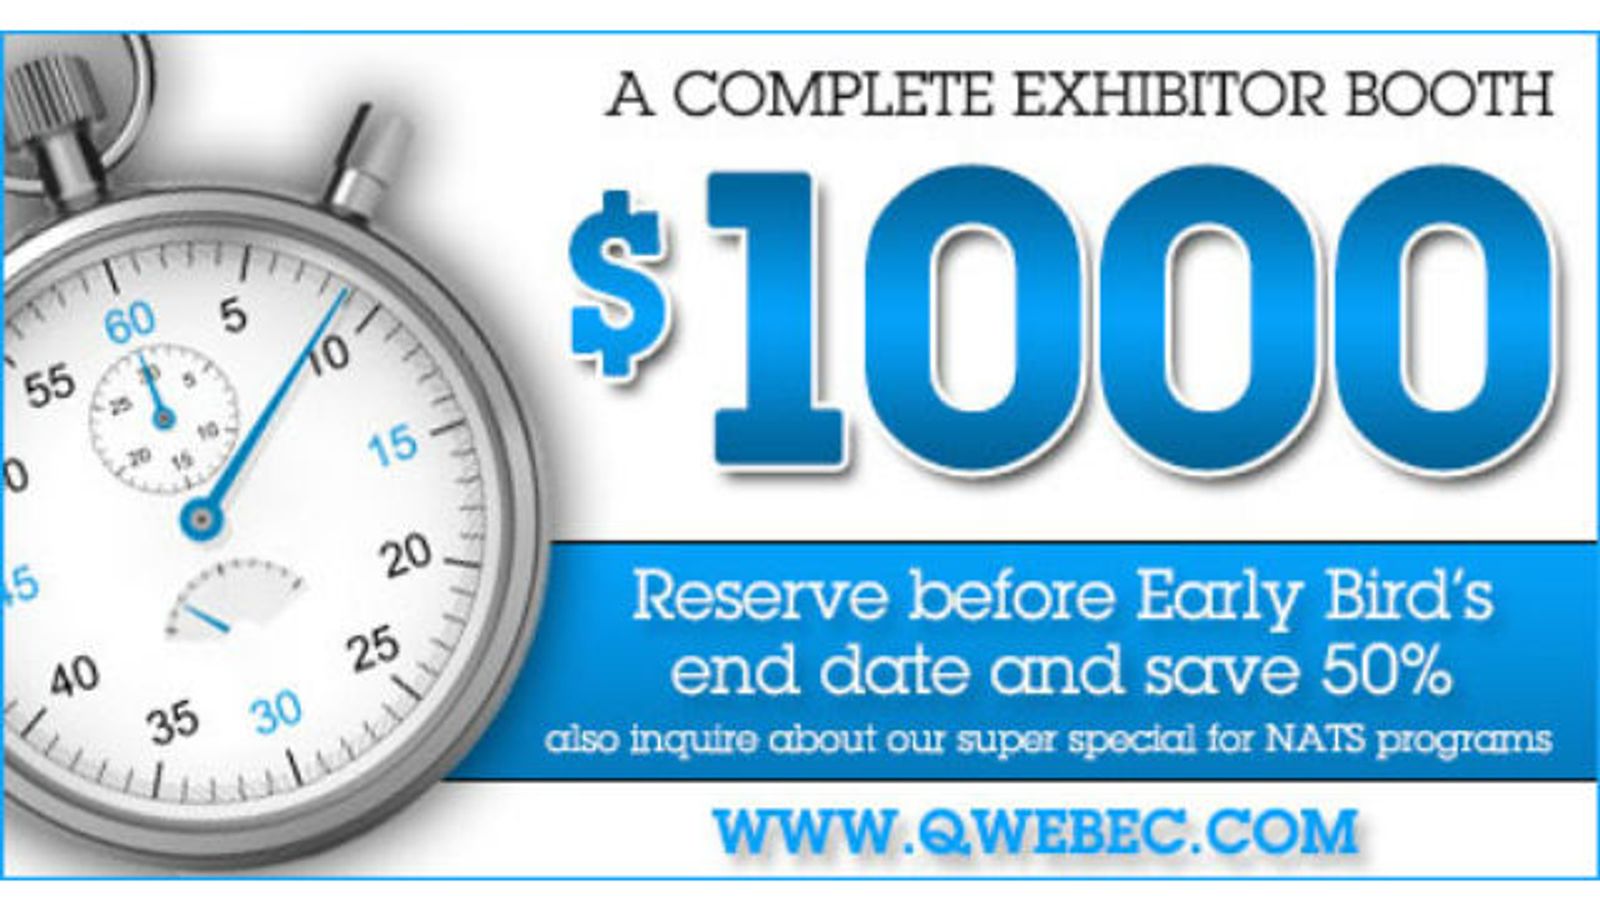 Last Week to Get Qwebec Expo Booth at 50% Off + NATS Special